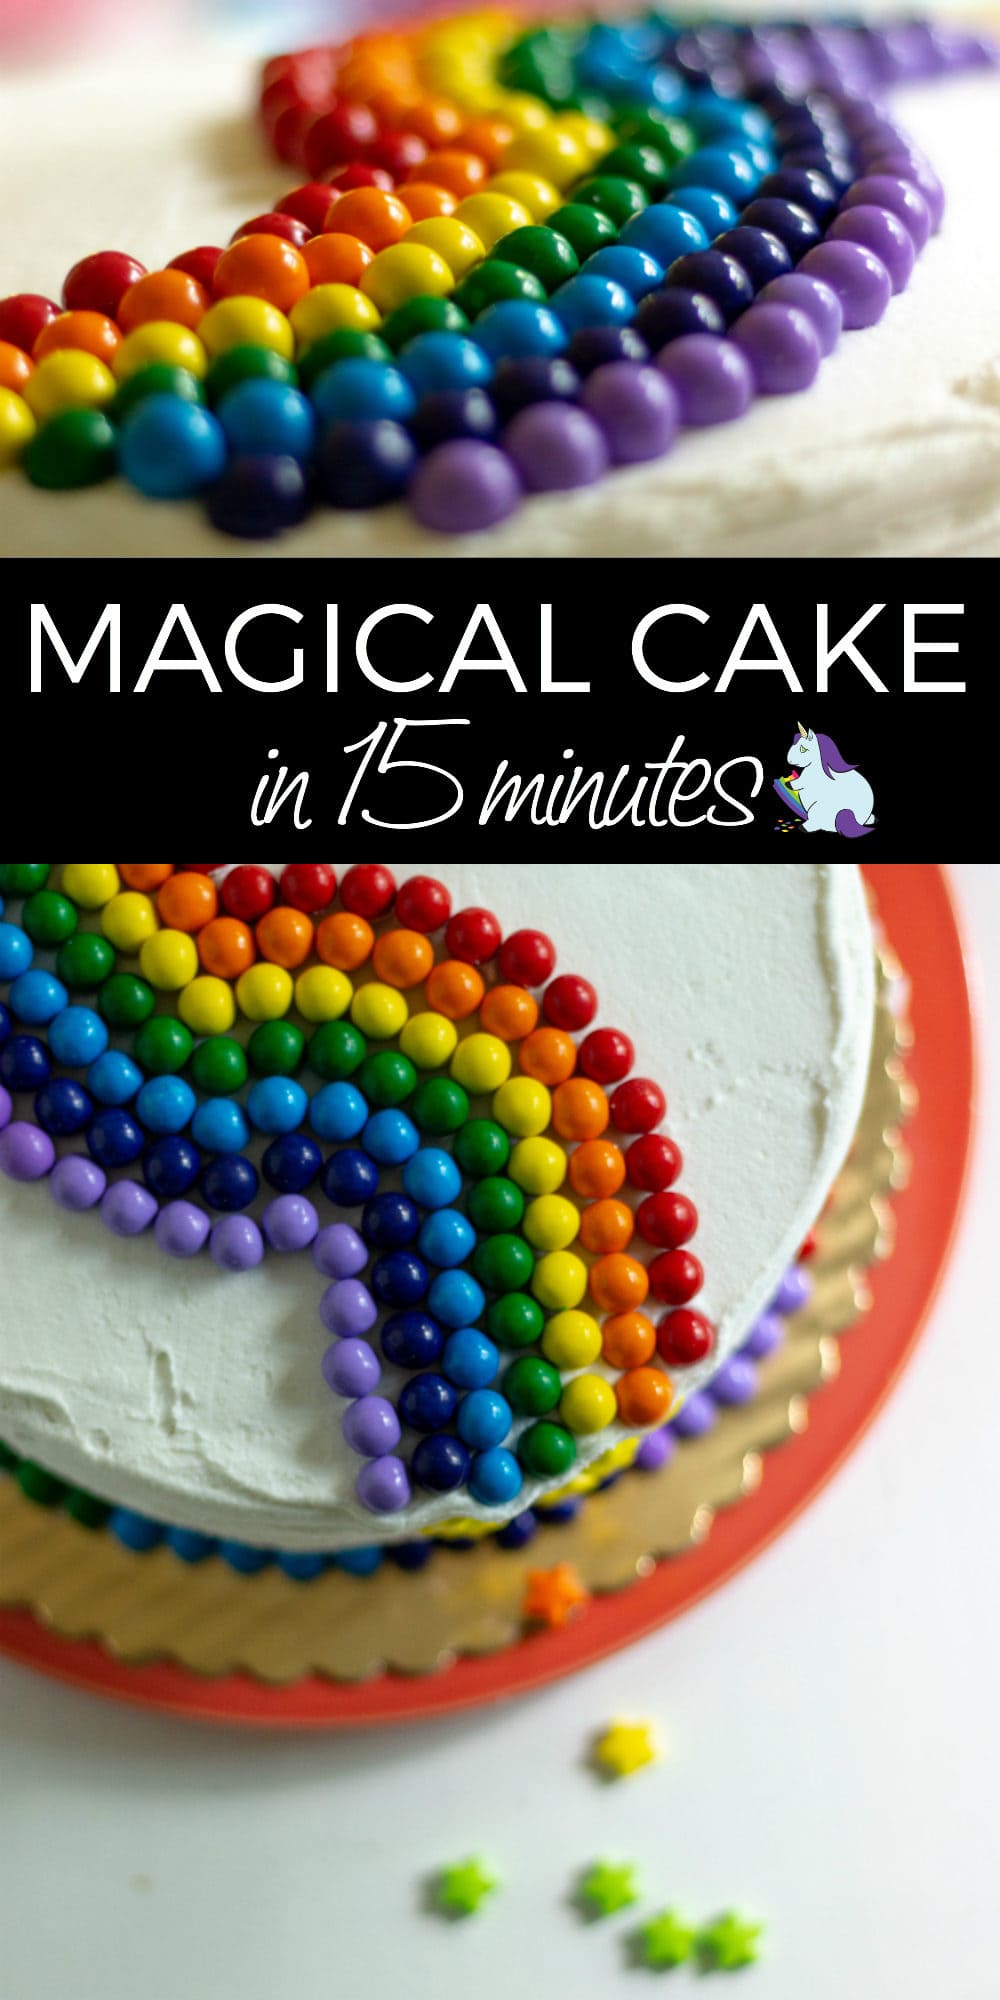 How to easily decorate a cake to make any occasion magical in under 15 minutes!